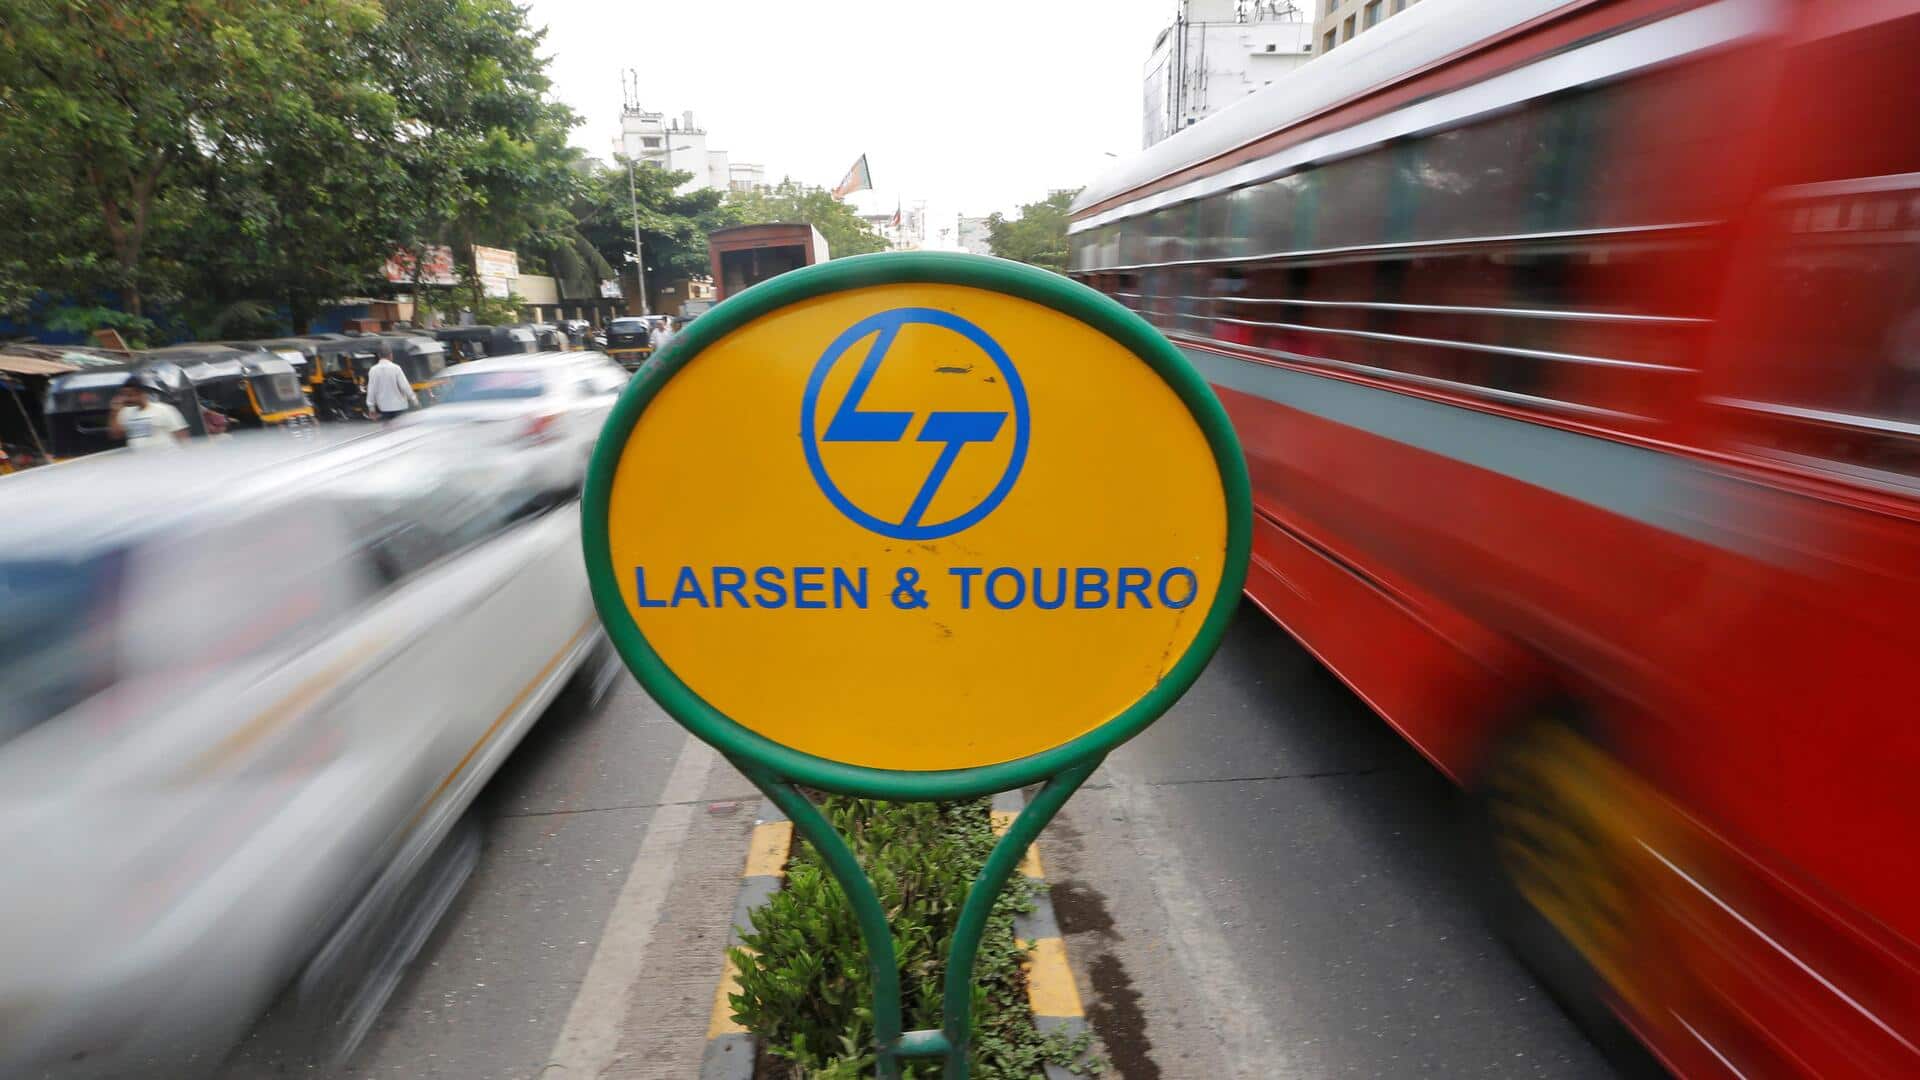 L&T's Q2 profit goes up 45% to Rs. 3,223 crore